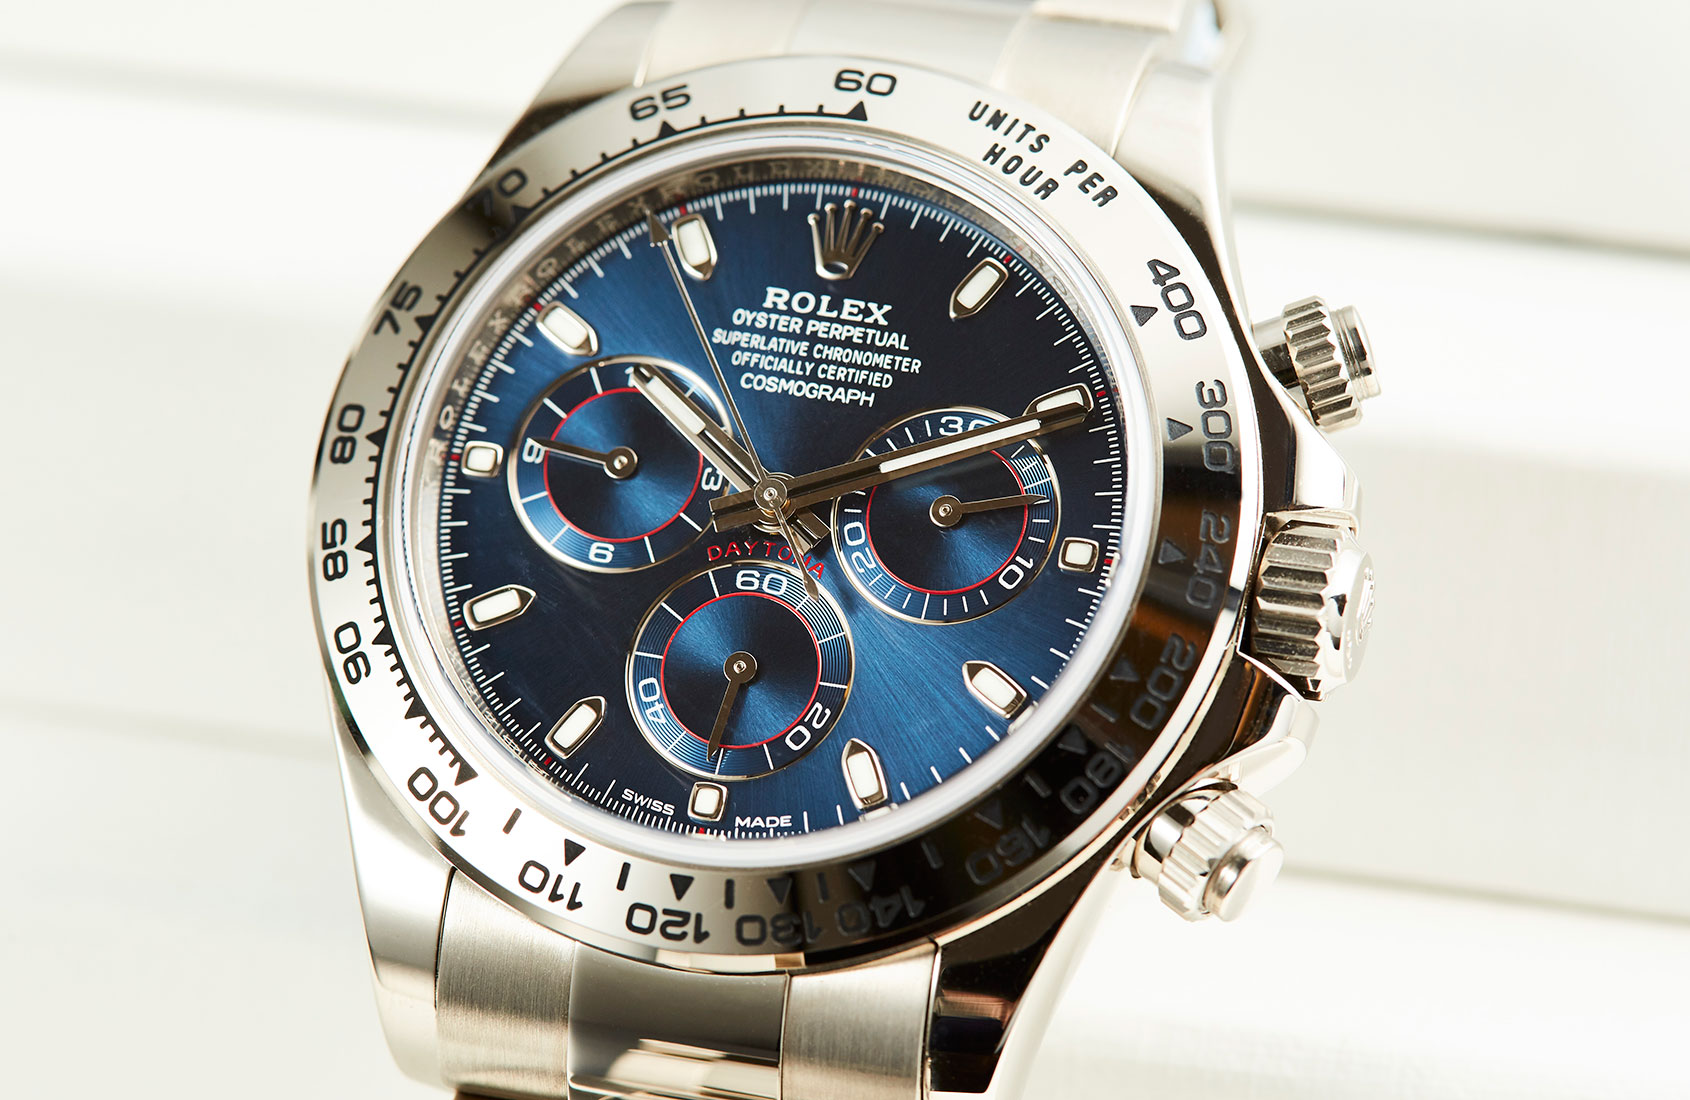 Rolex Daytona in white gold with blue dial (ref. 116509)